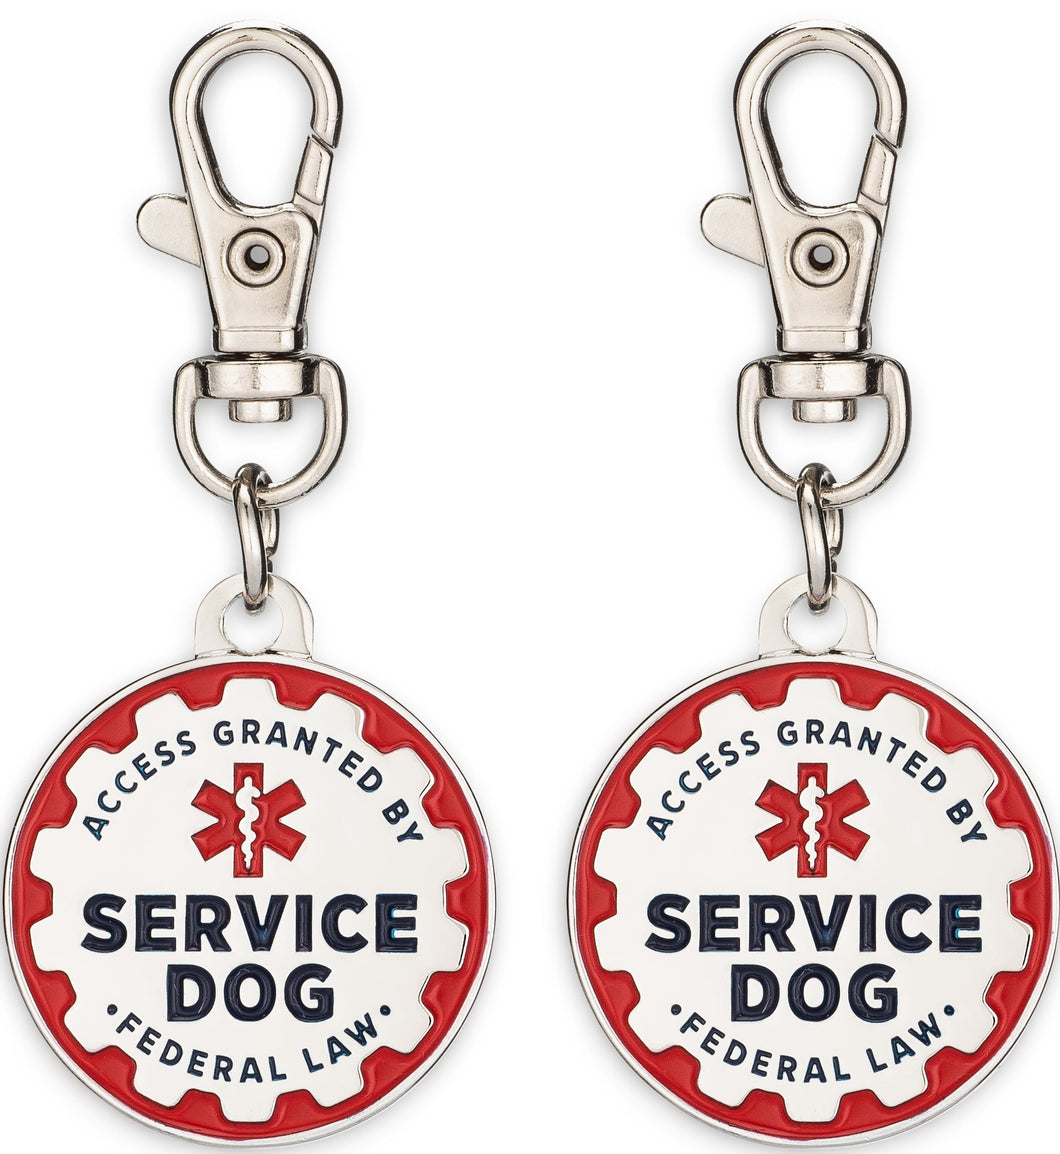 Industrial Puppy Service Dog Tag, 2 Pack: Metal Pet ID Tags for Service Animals, Emotional Support Dogs and Therapy Dogs, 1/1.25 Inch Diameter, Double Sided, Navy Lettering and Red Enamel Trim